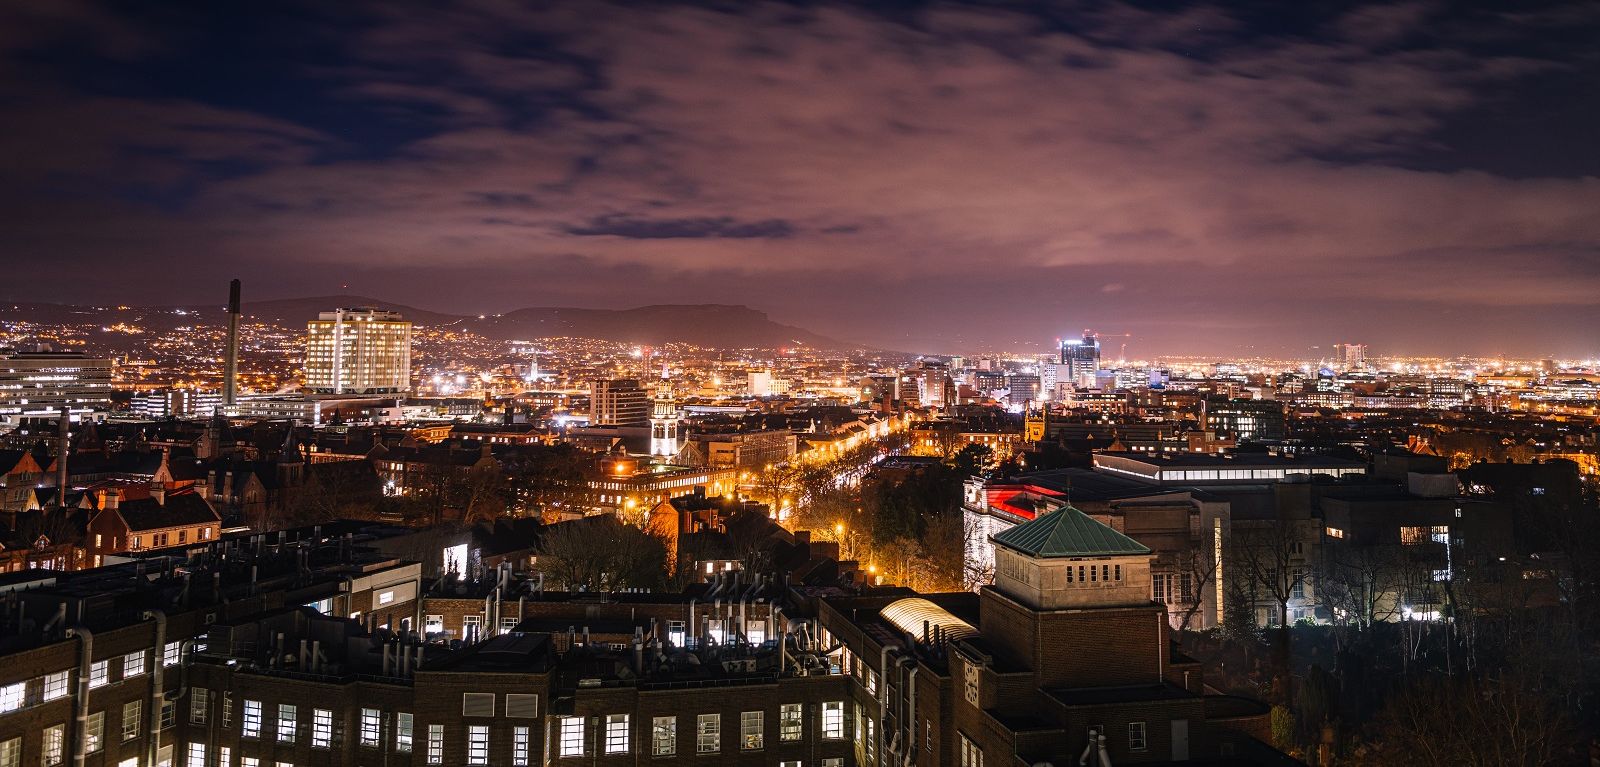 A dramatic view of the Belfast Skyline at night, light up by the lights of buildings and street lighting, from above Queen's University Belfast's David Keir building